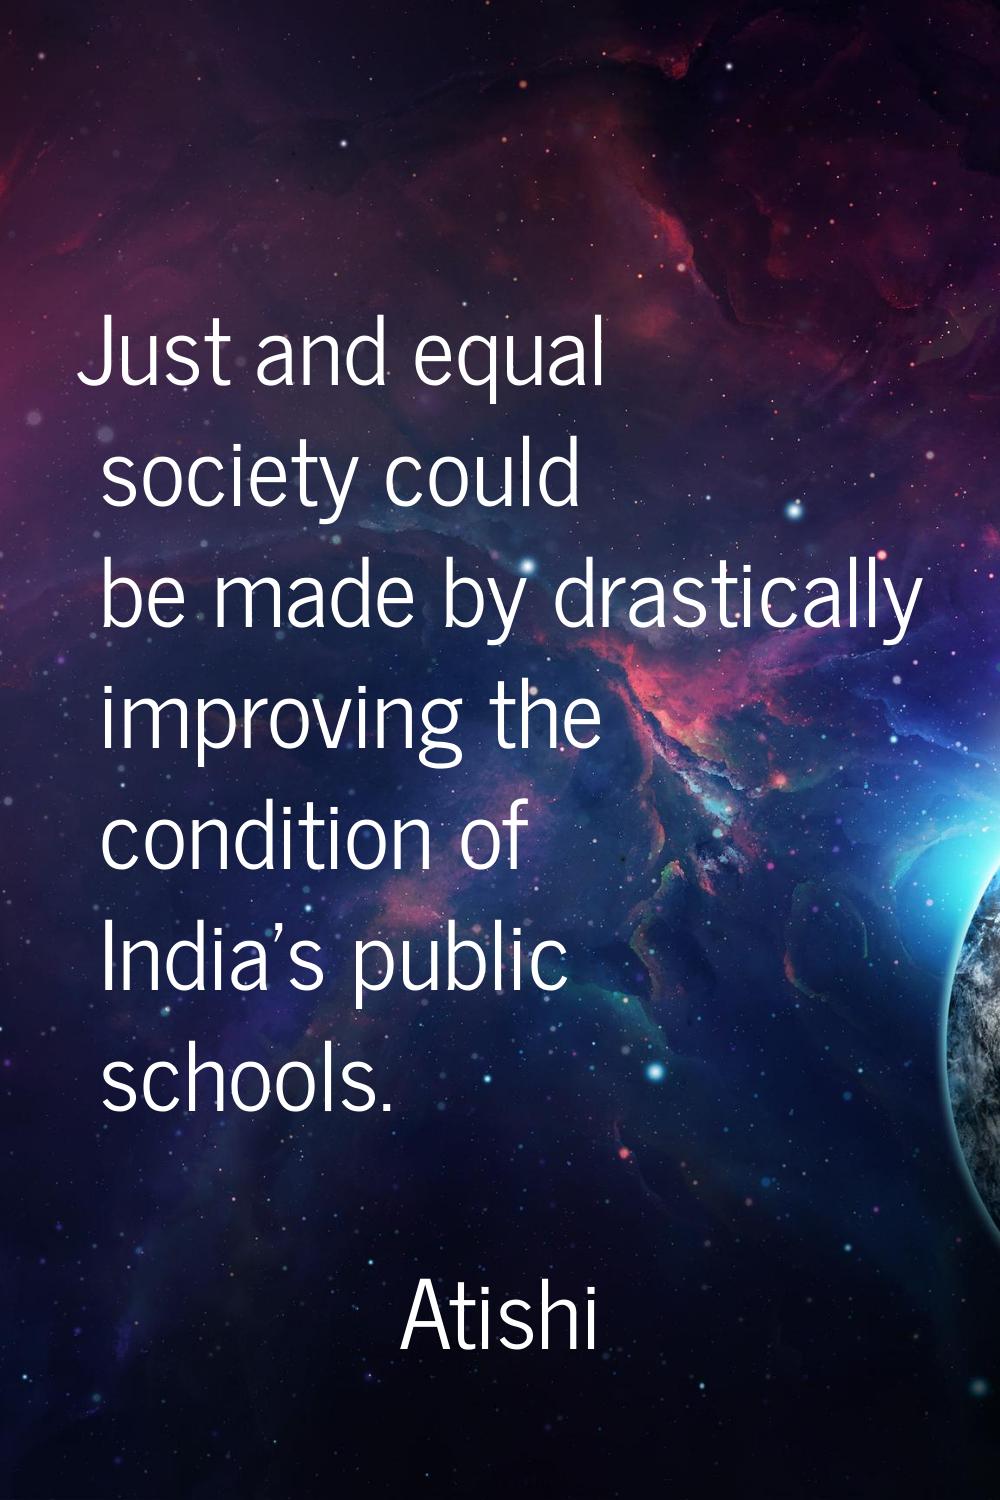 Just and equal society could be made by drastically improving the condition of India's public schoo